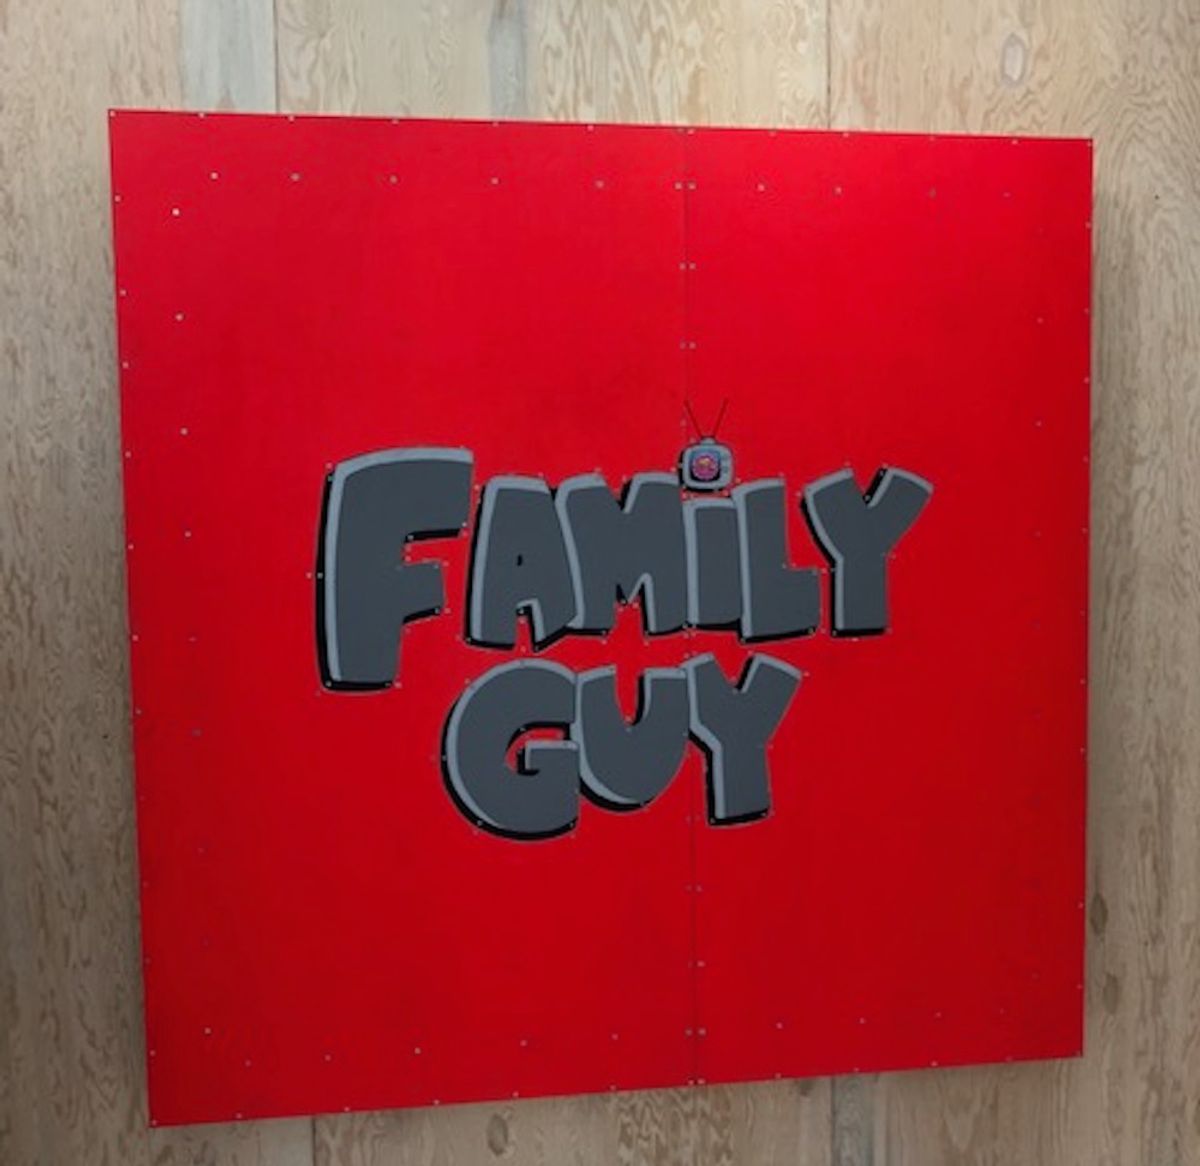 Tom Sachs has used marquetry to pay homage to sitcom Family Guy Gareth Harris